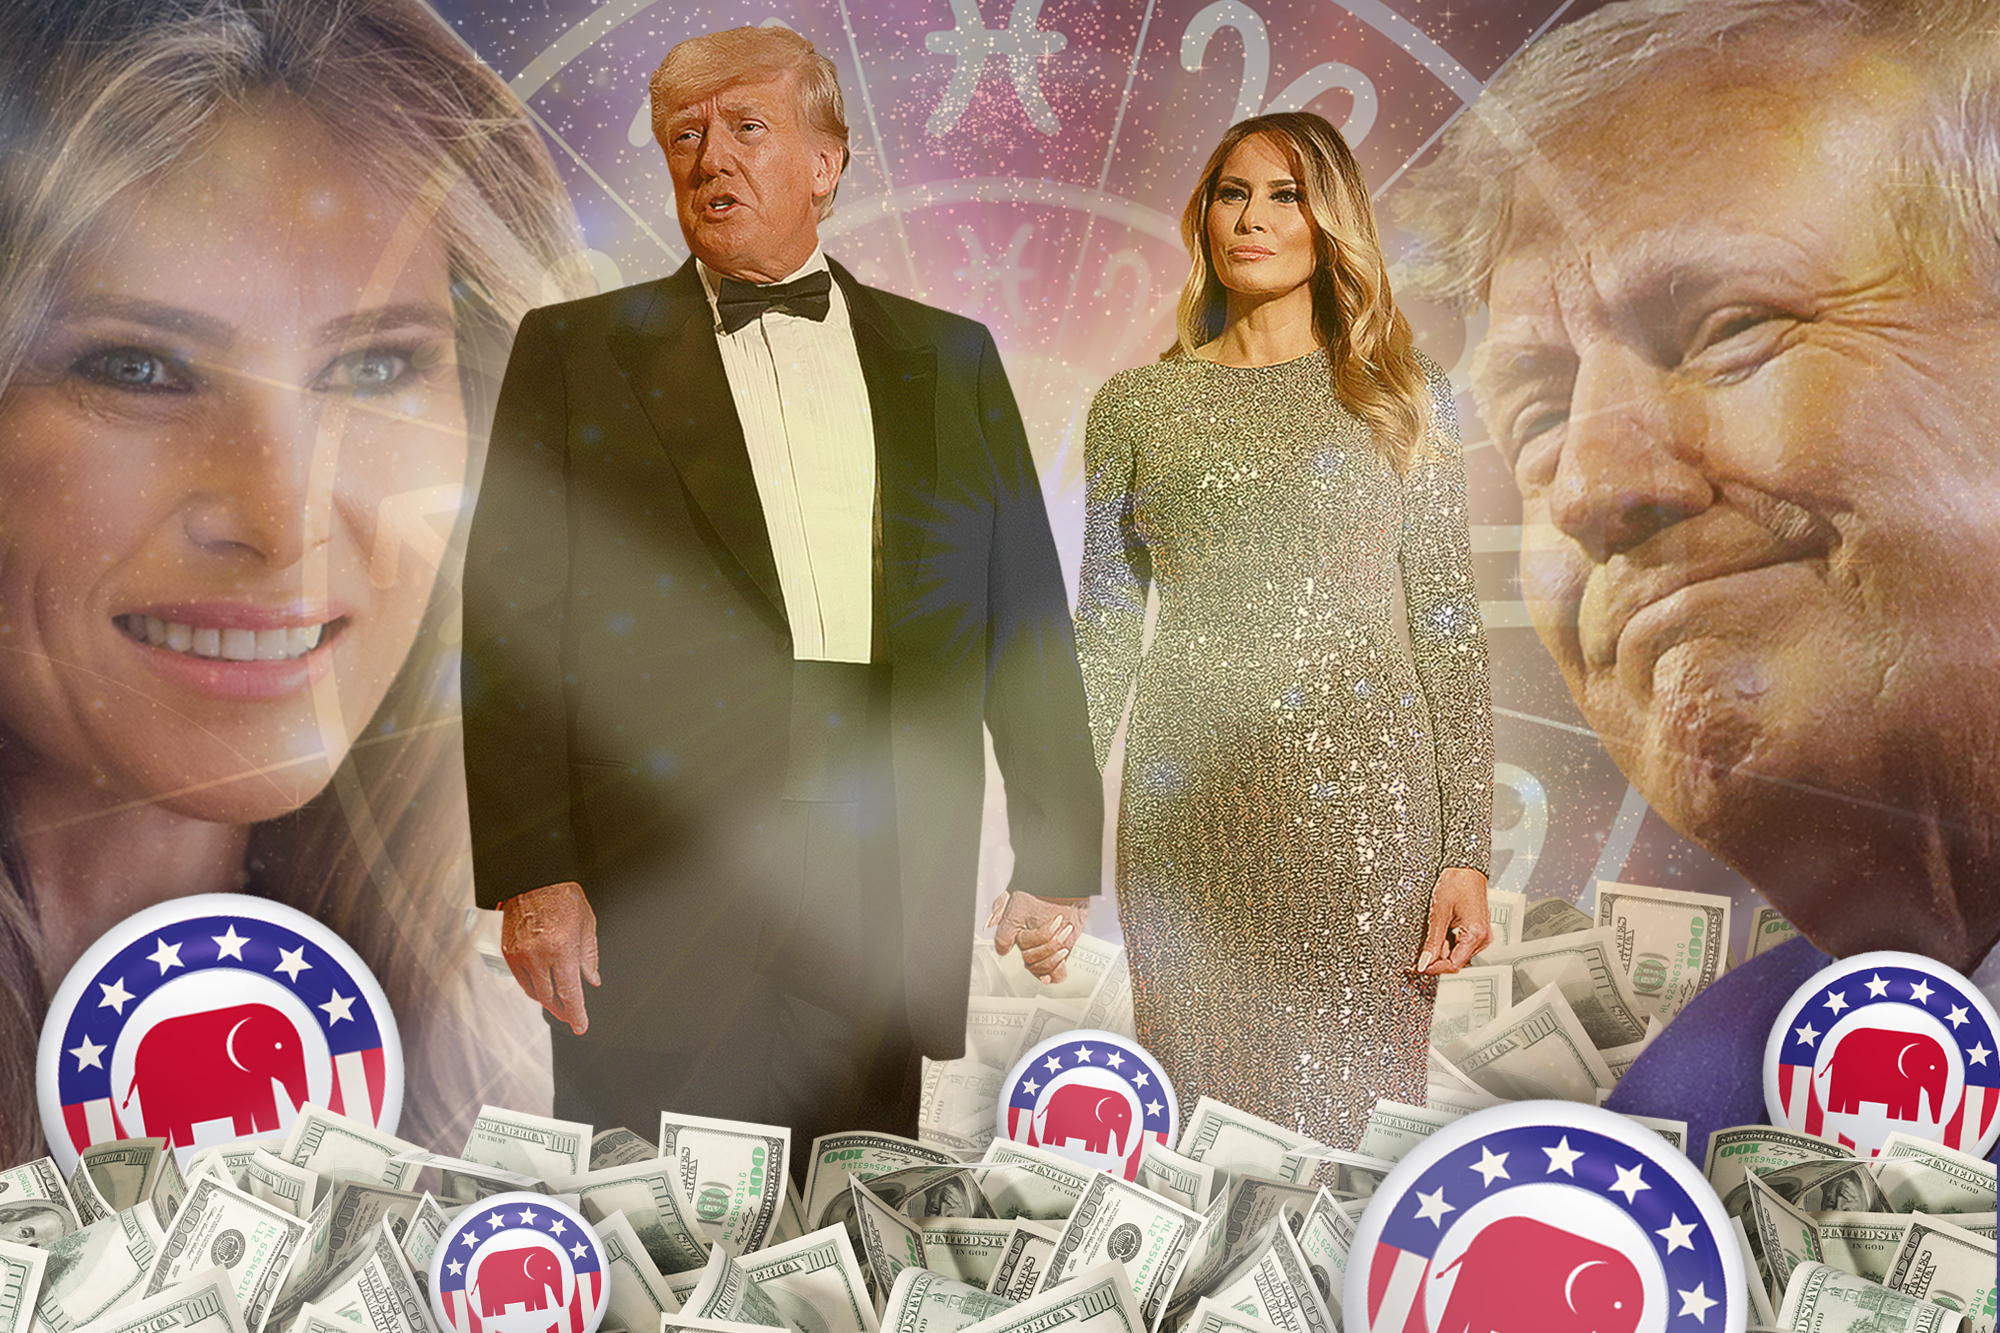 Donald and Melania Trump’s compatibility: zodiac conquest energy and luxury bind this pair